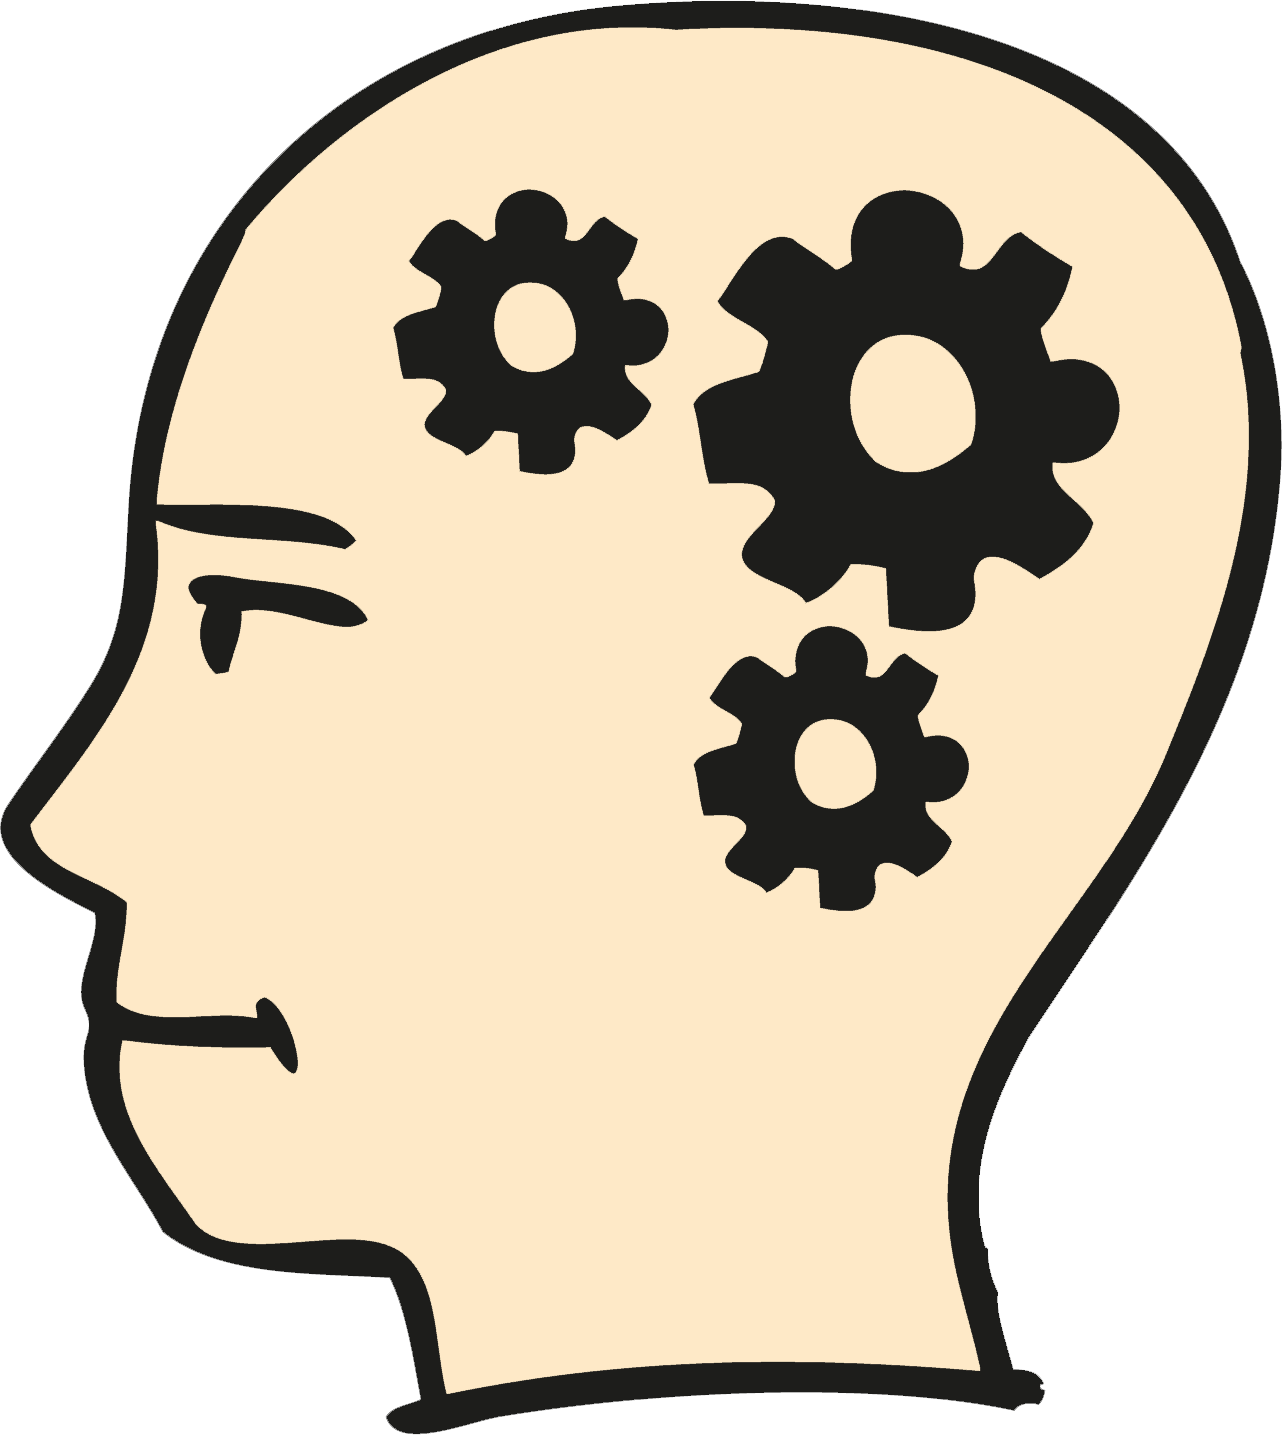 Brain Vector Gears Free Transparent Image HQ PNG Image